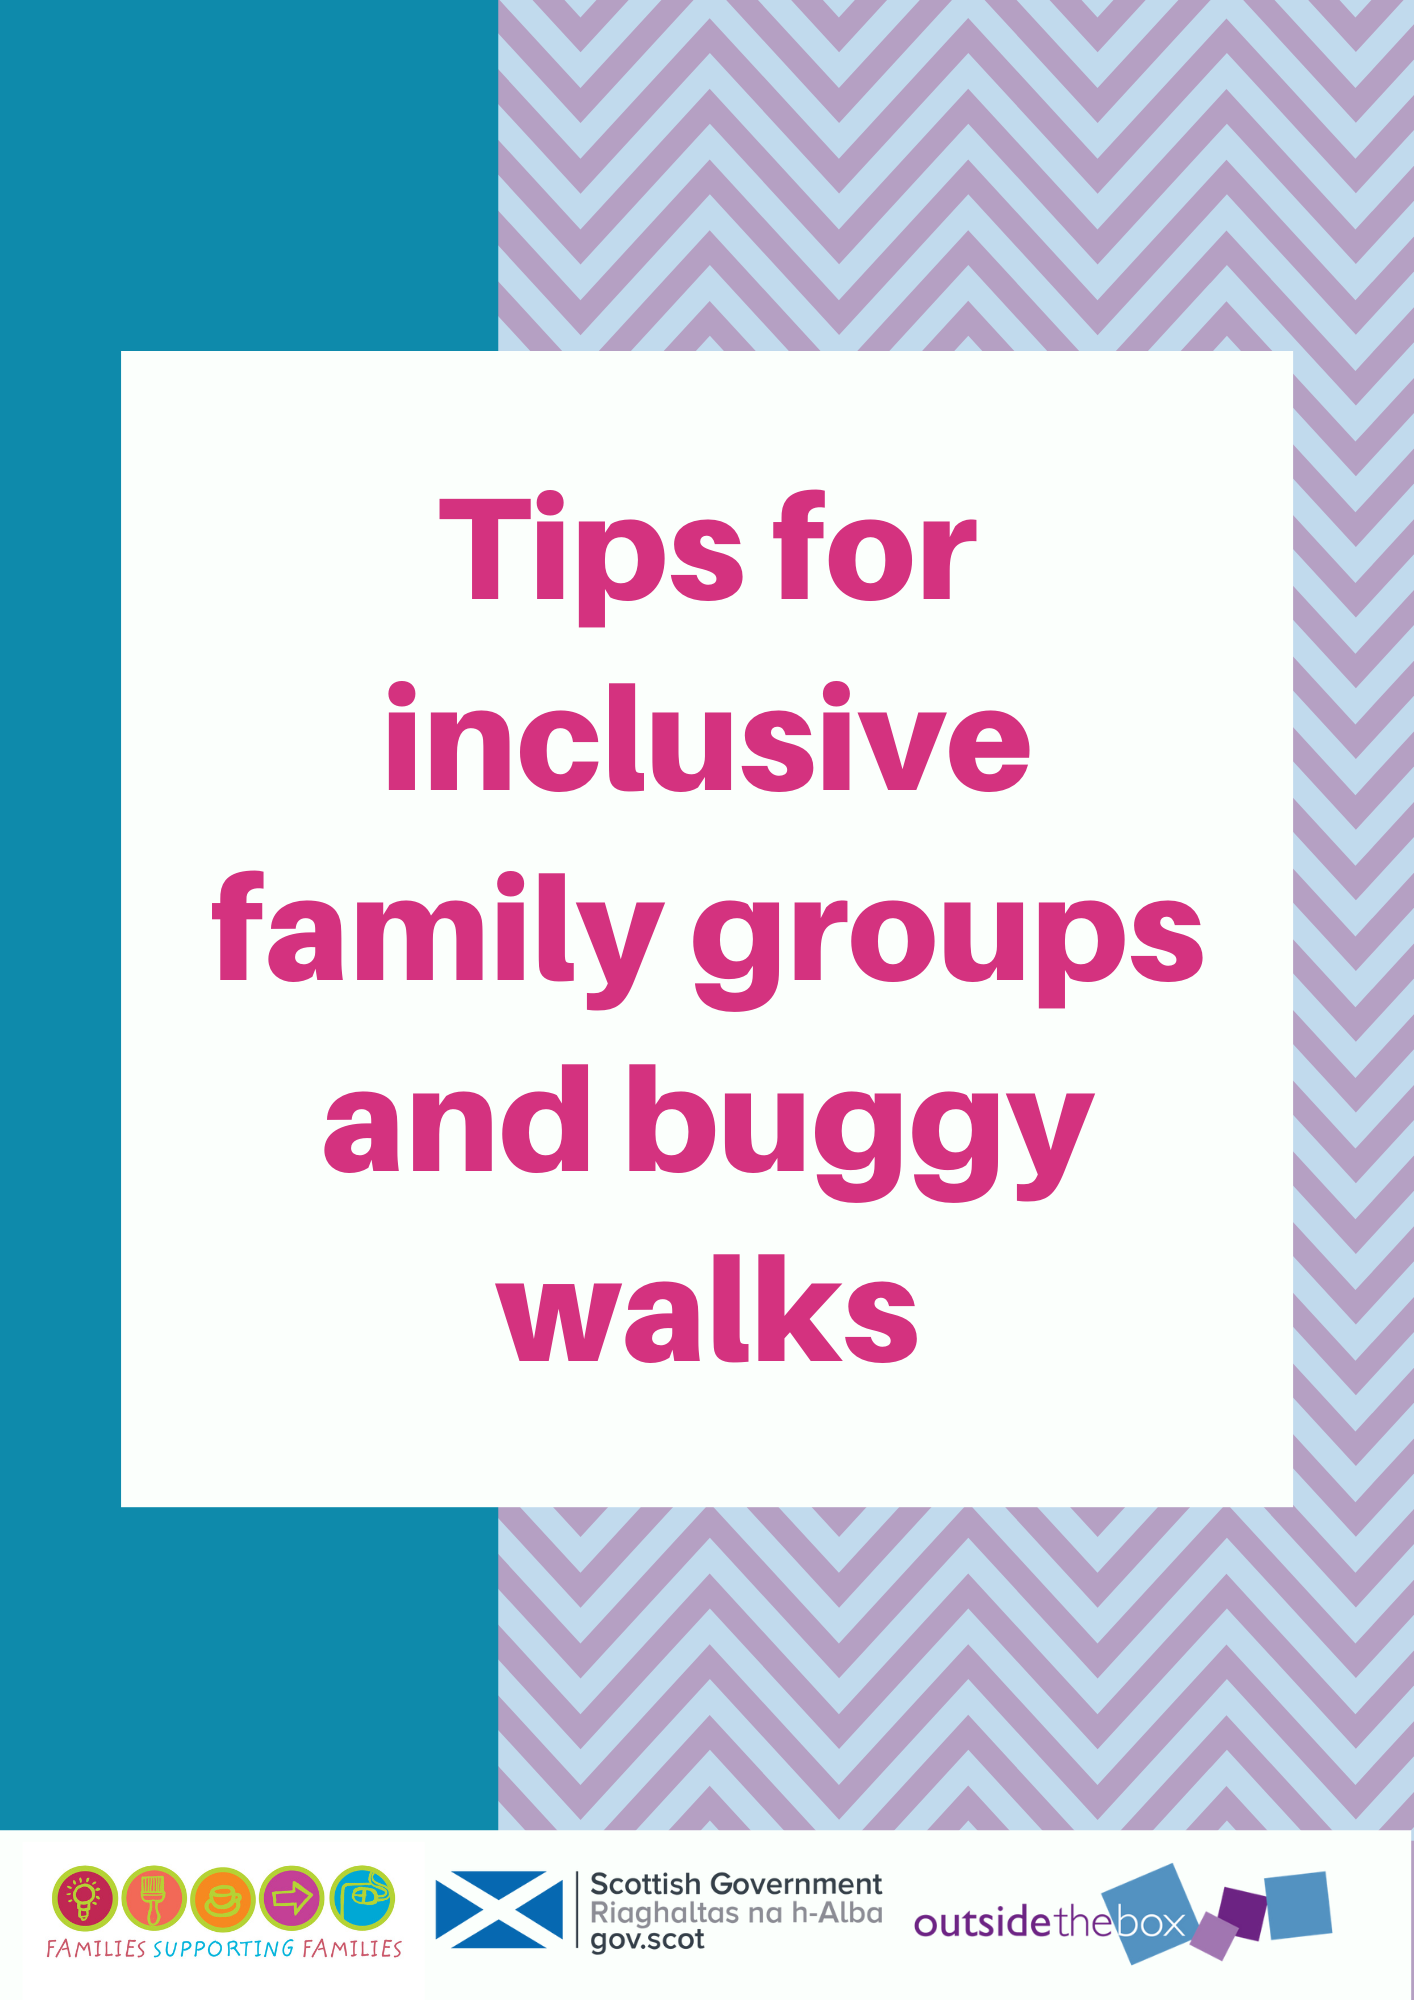 Tips for inclusive family groups and buggy walks